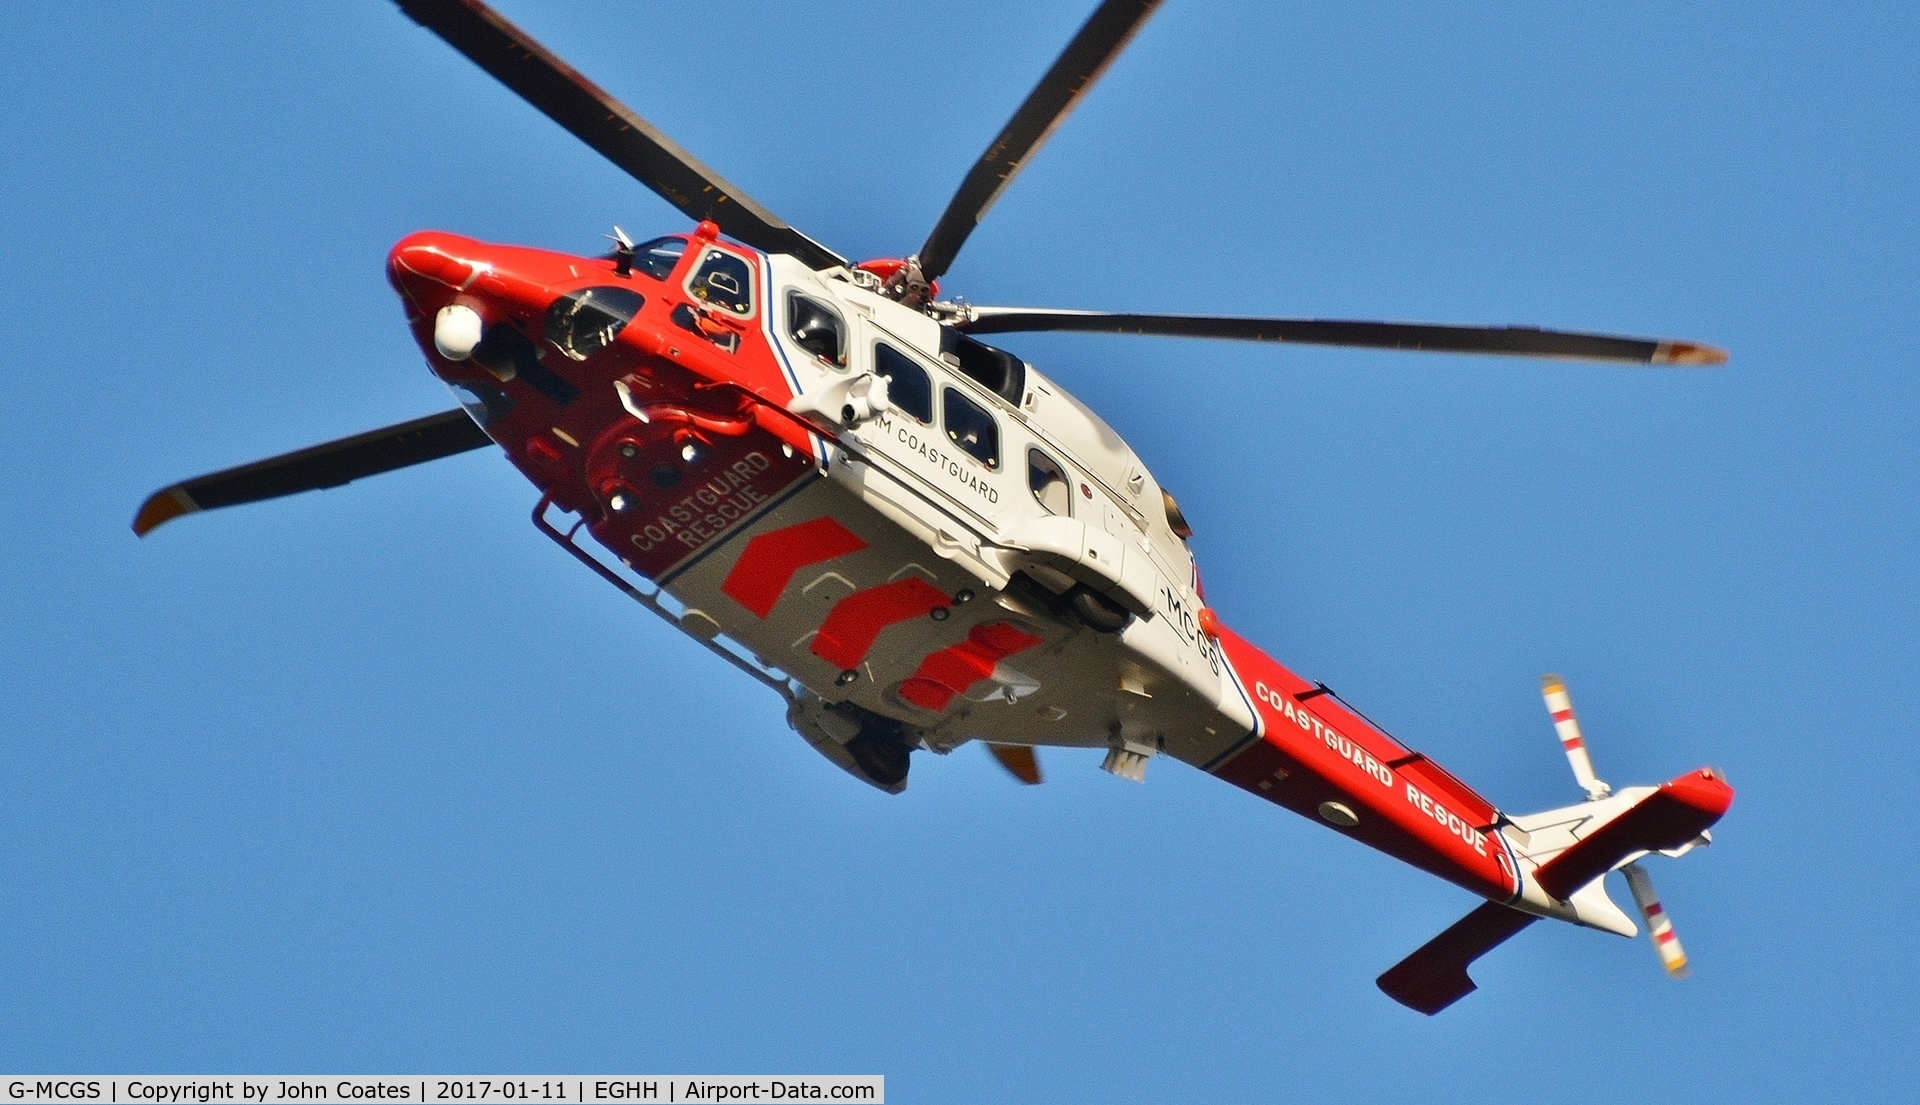 G-MCGS, 2014 AgustaWestland AW189 C/N 92005, New resident at Lee on Solent training